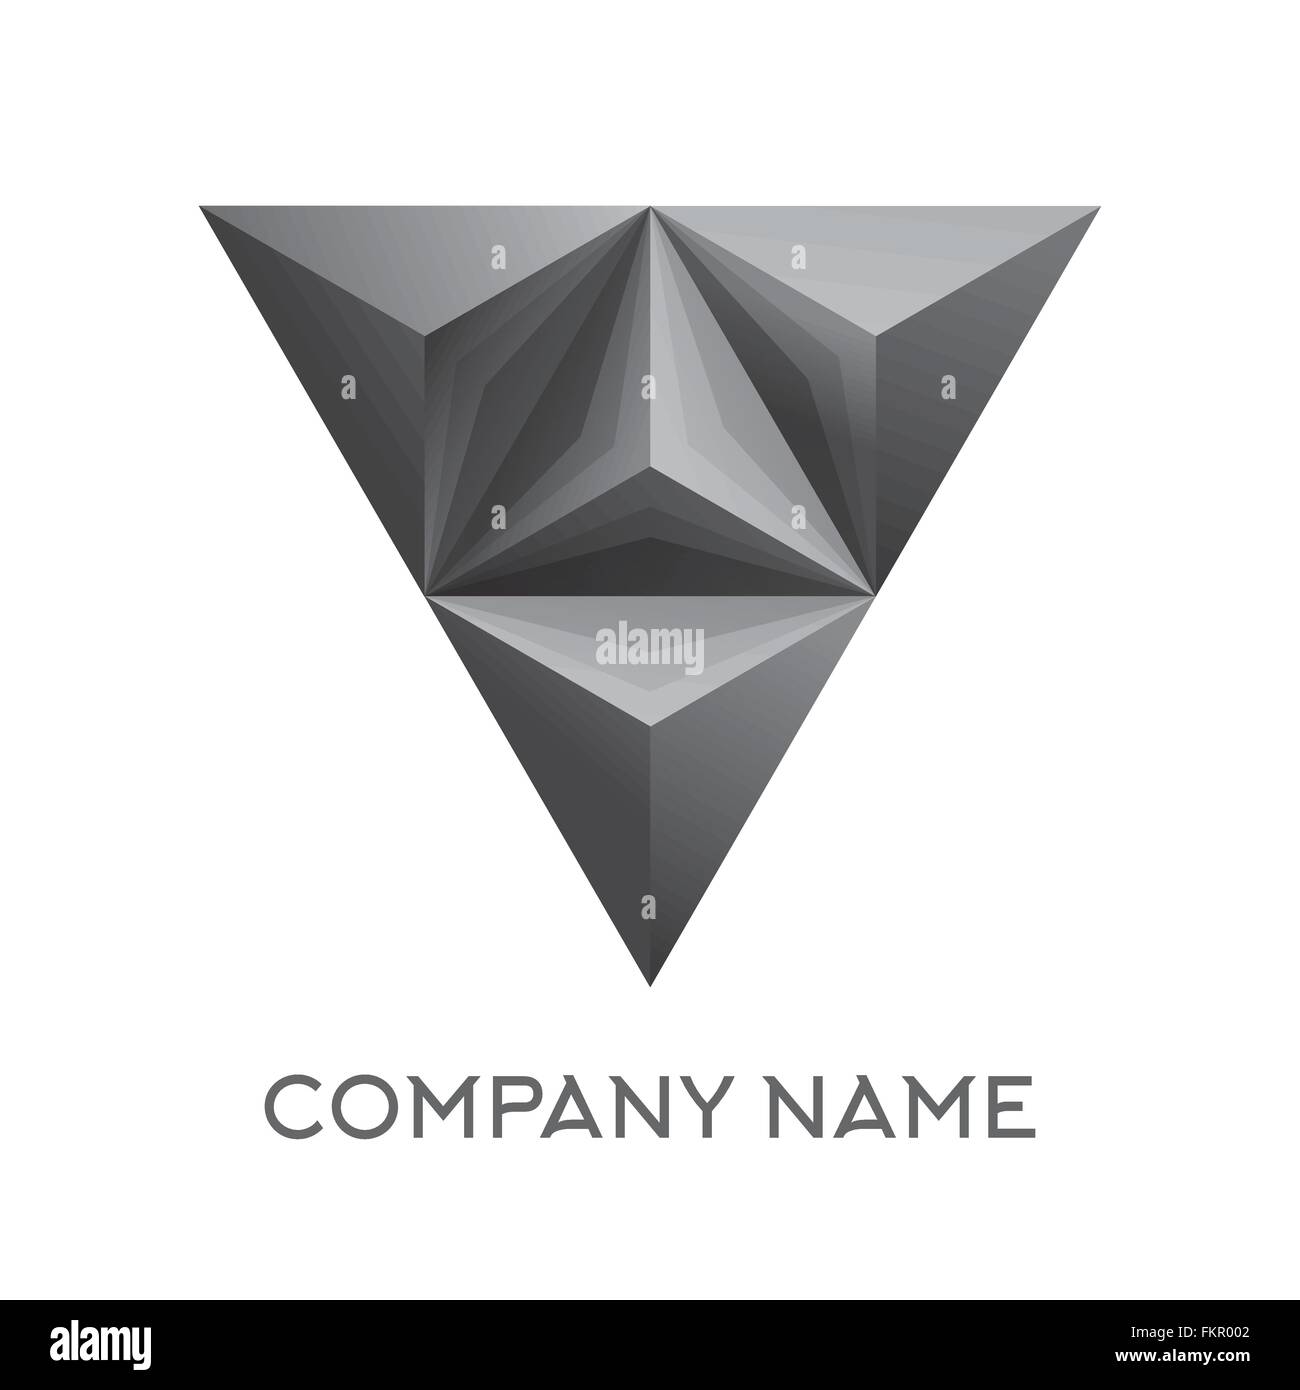 Abstract company logo with 3d triangle figure. vector illustration. Isolated on white background Stock Vector